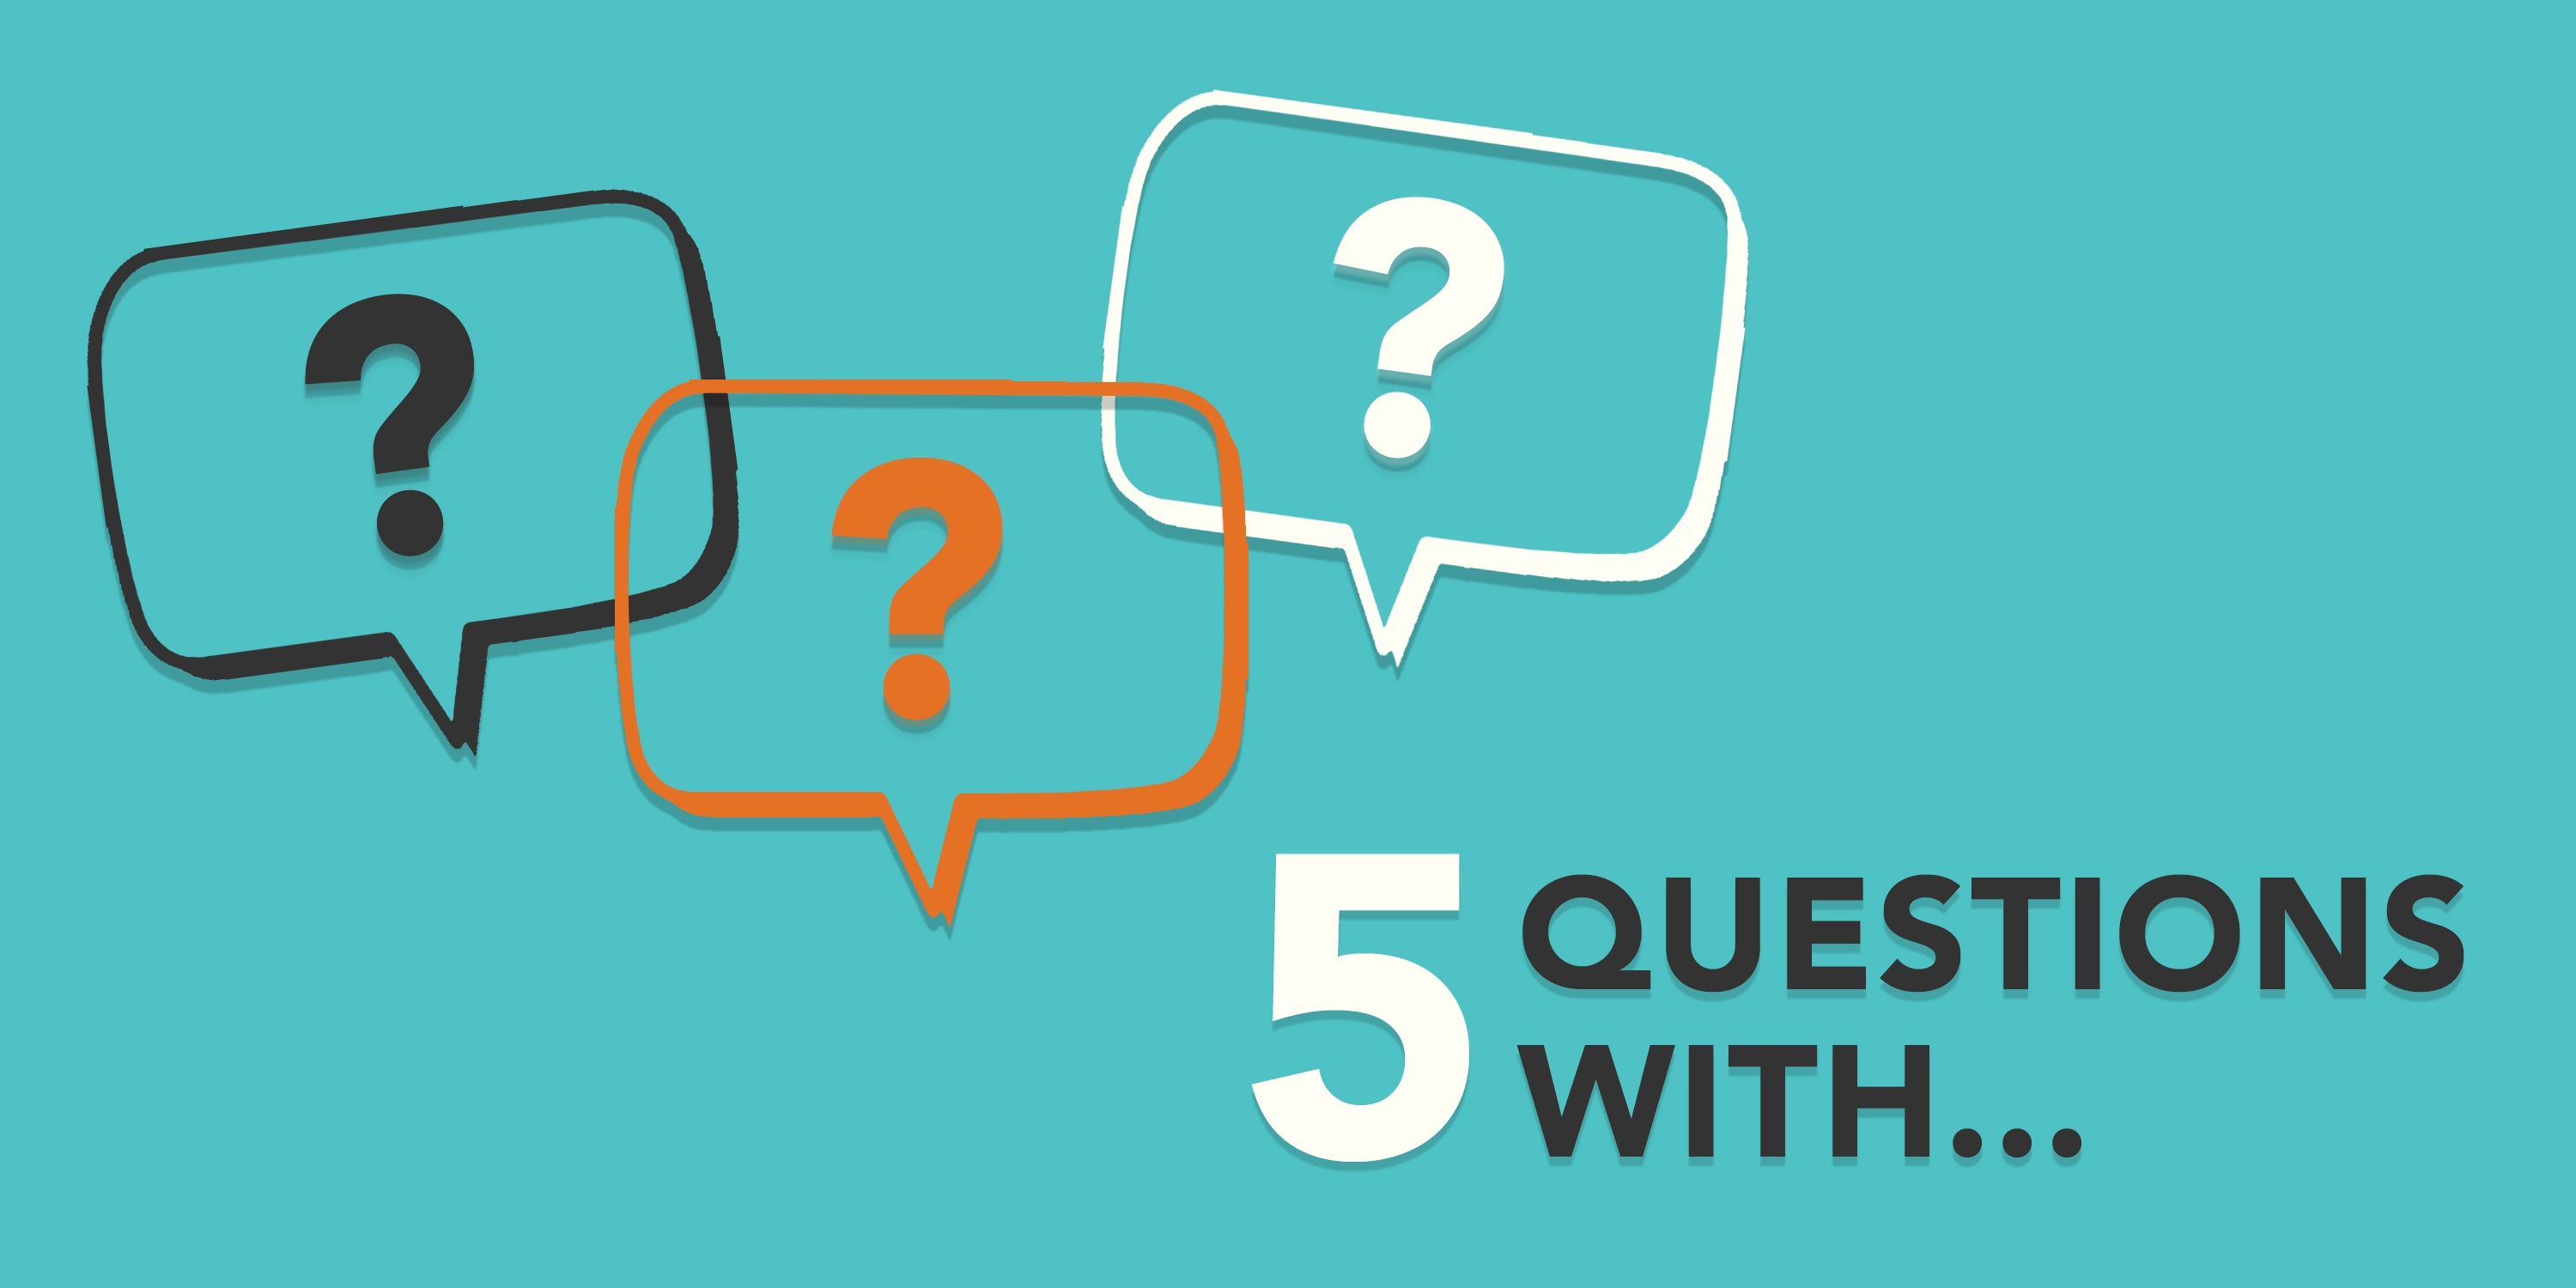 5 Questions With... Blog Series